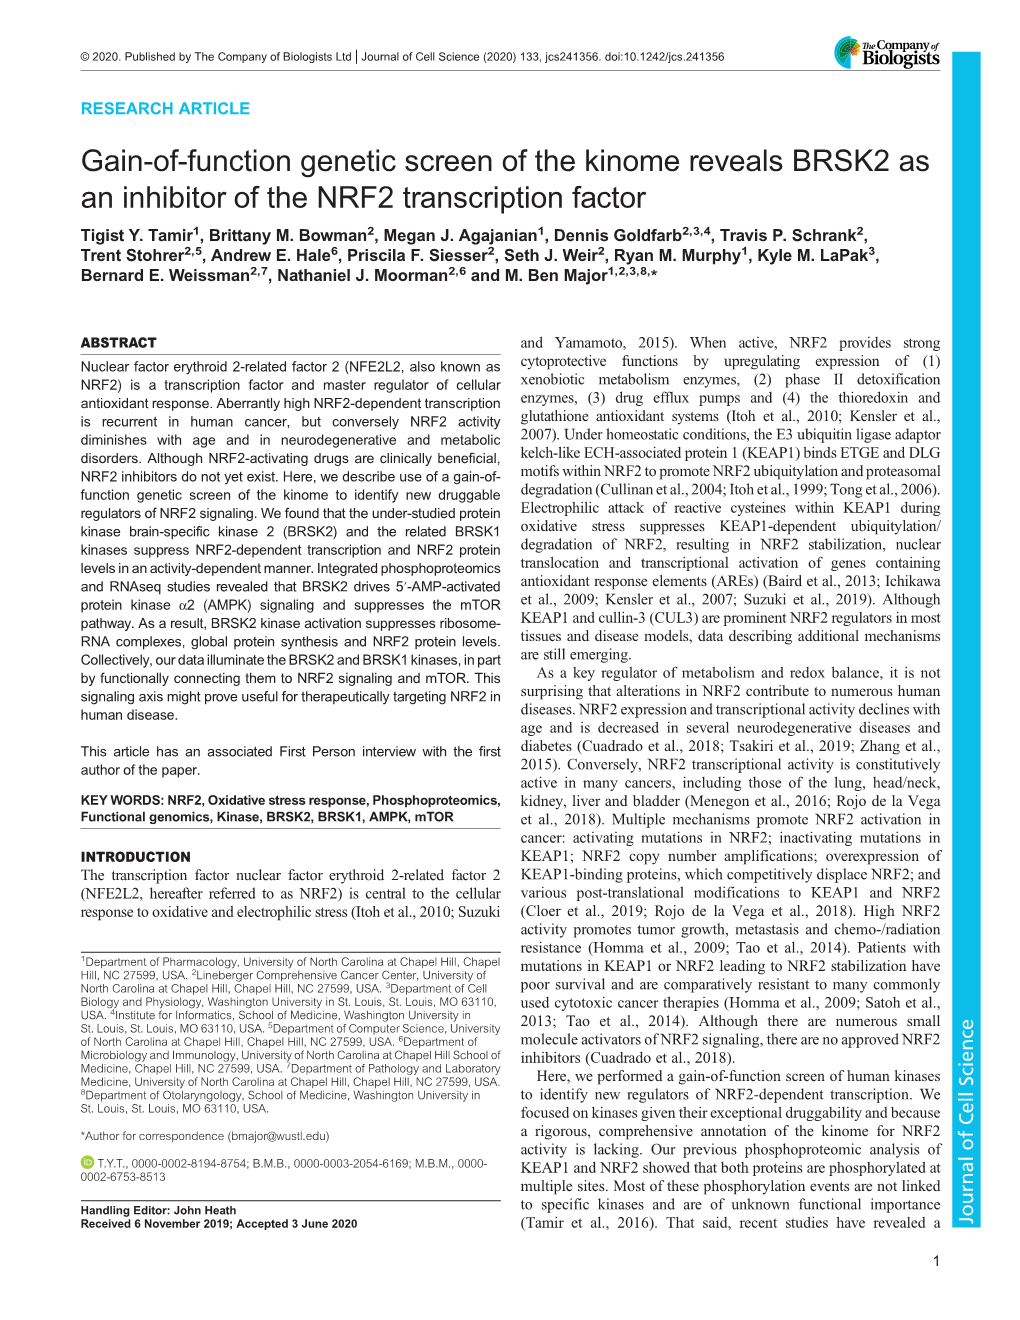 Gain-Of-Function Genetic Screen of the Kinome Reveals BRSK2 As an Inhibitor of the NRF2 Transcription Factor Tigist Y